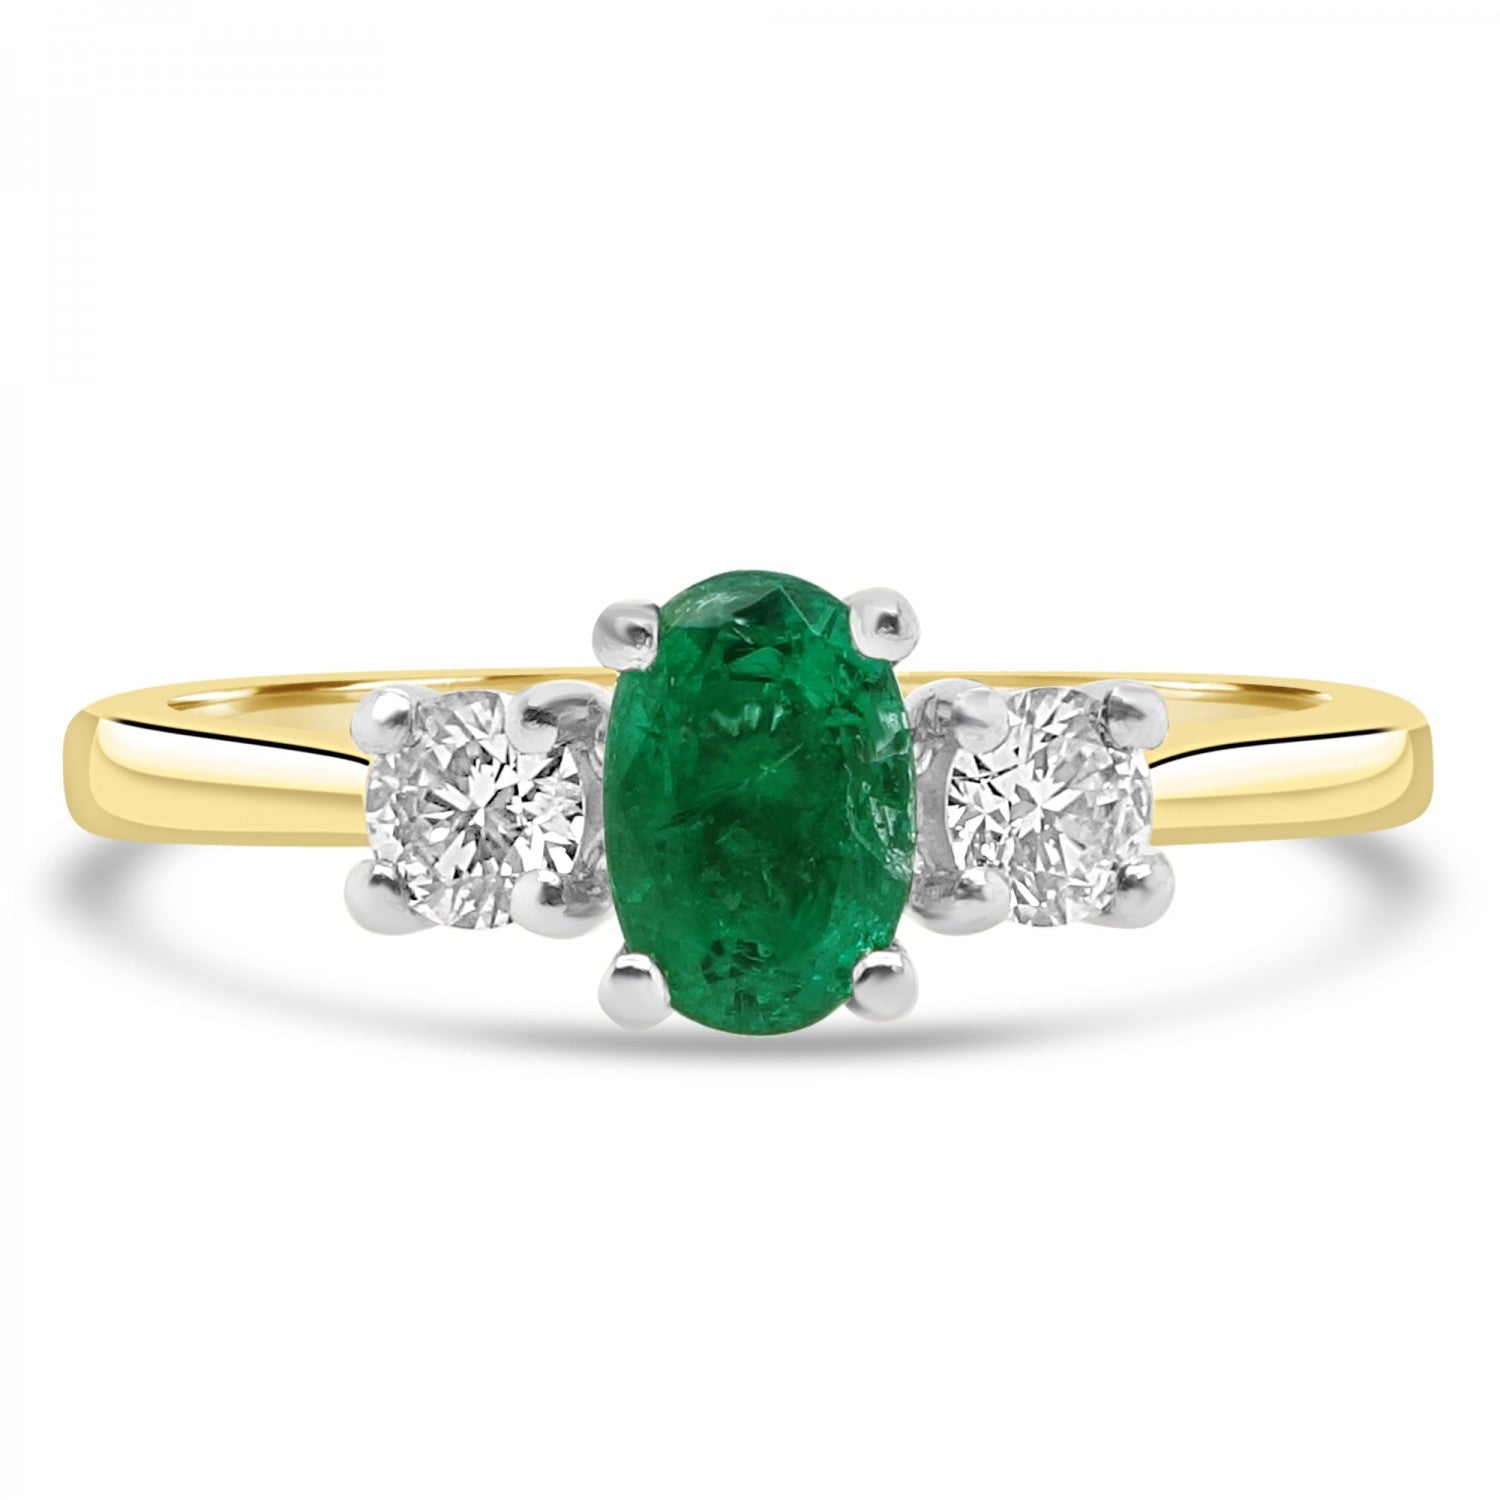 OVAL CUT EMERALD TRILOGY ENGAGEMENT RING